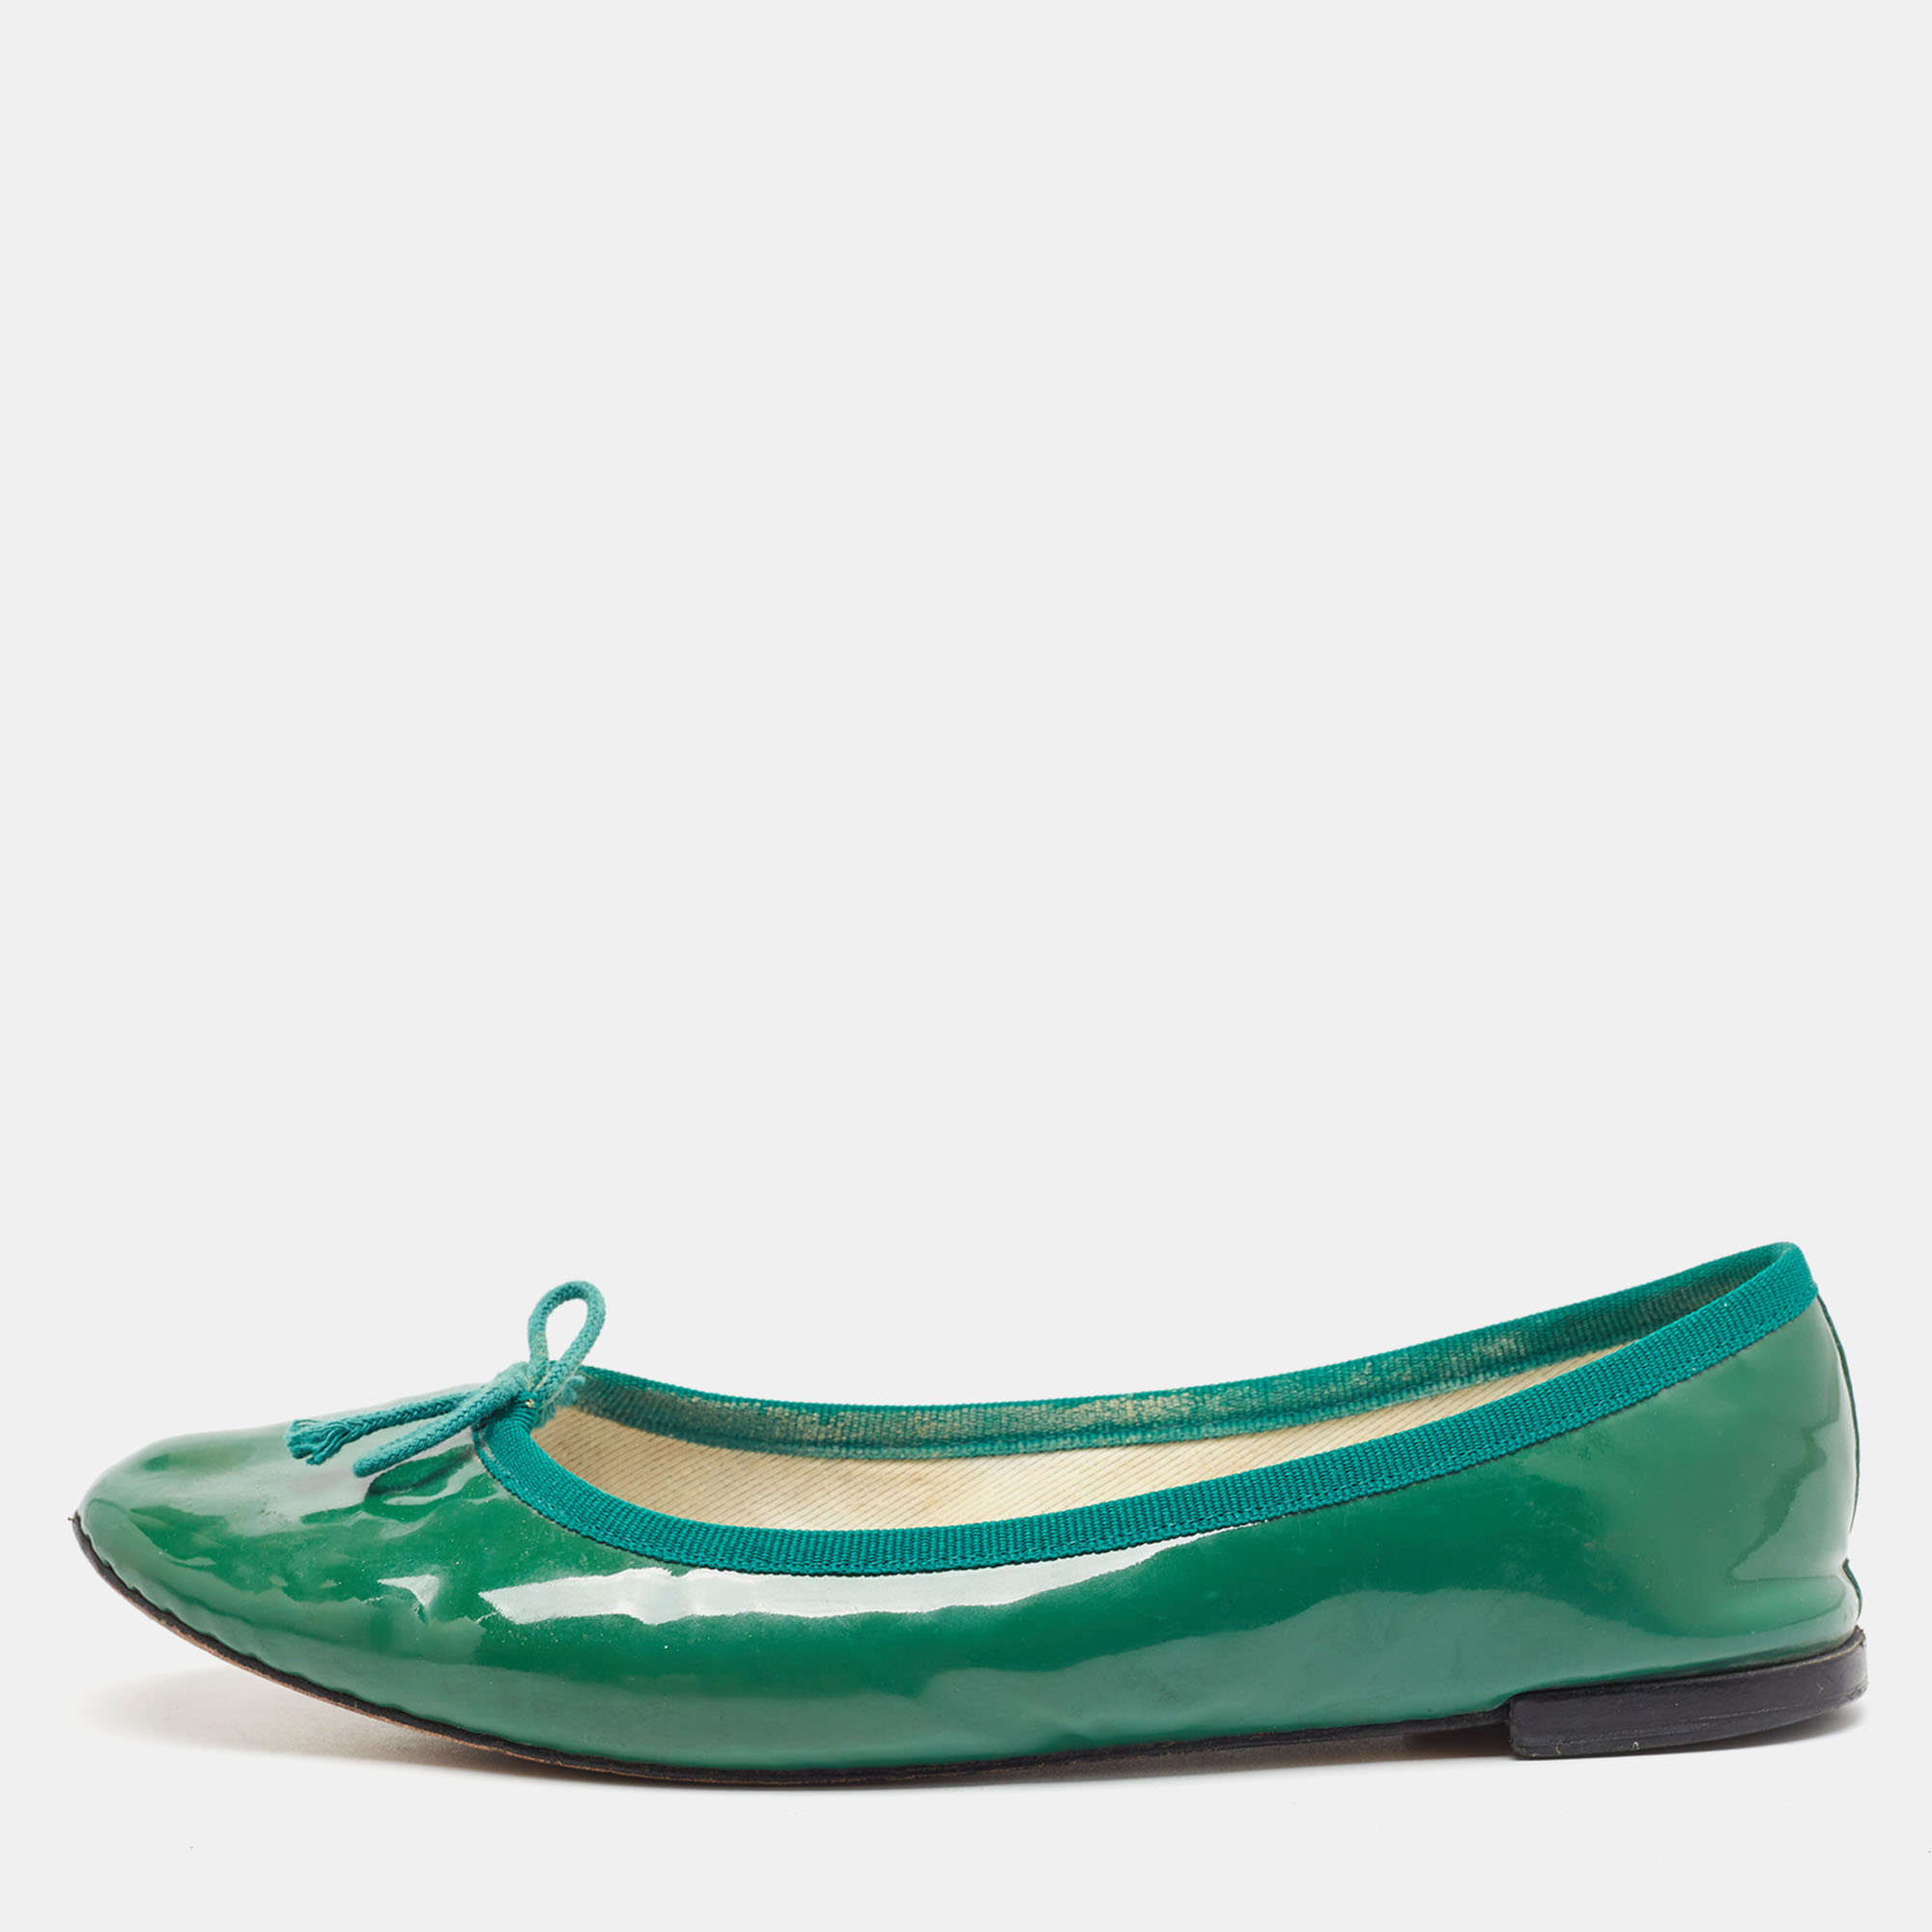 Repetto green patent leather bow ballet flats size 38